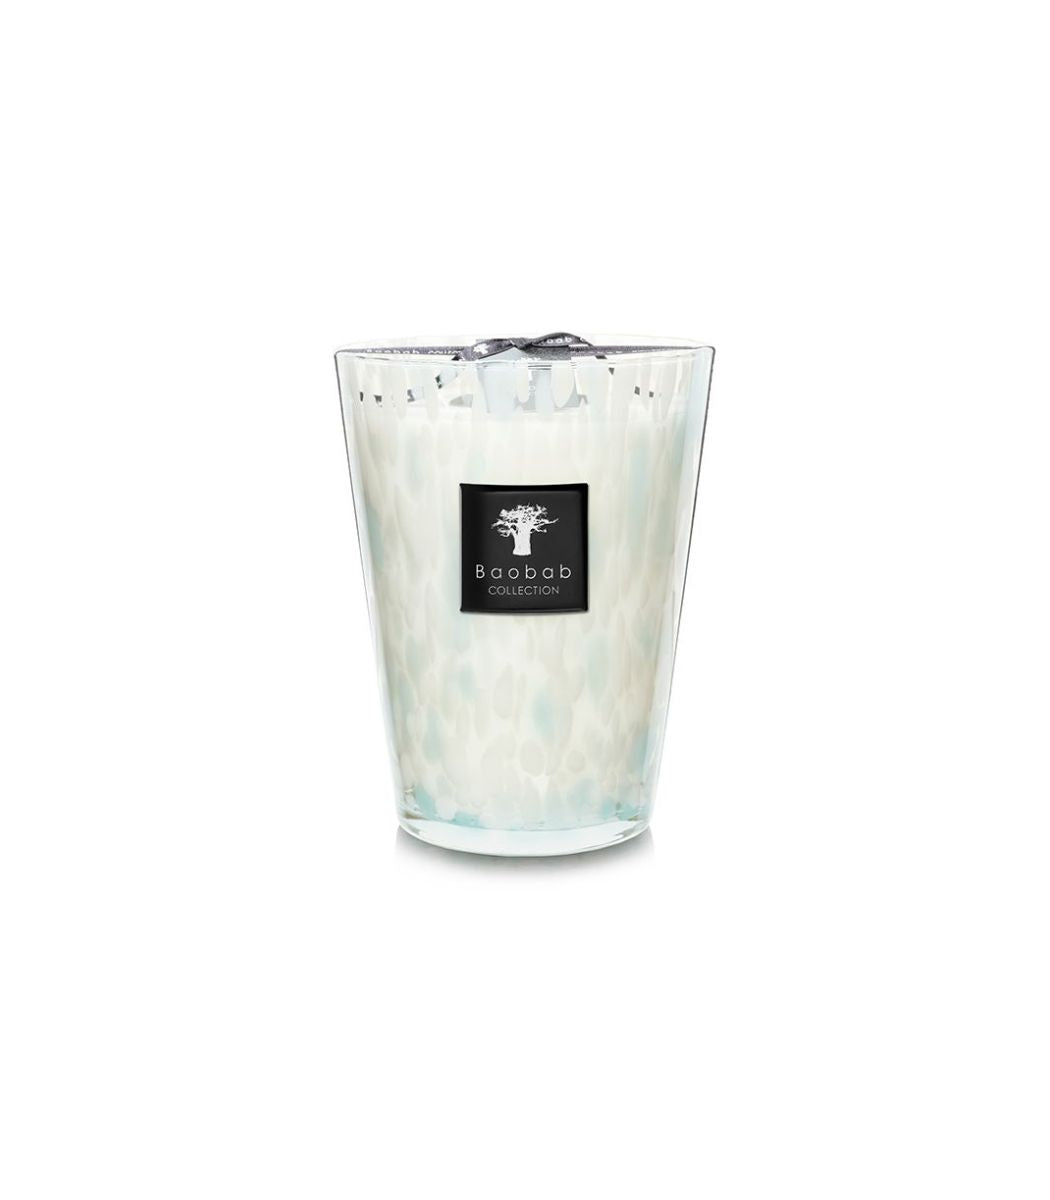 SCENTED CANDLE PEARLS SAPPHIRE - Baobab Collection